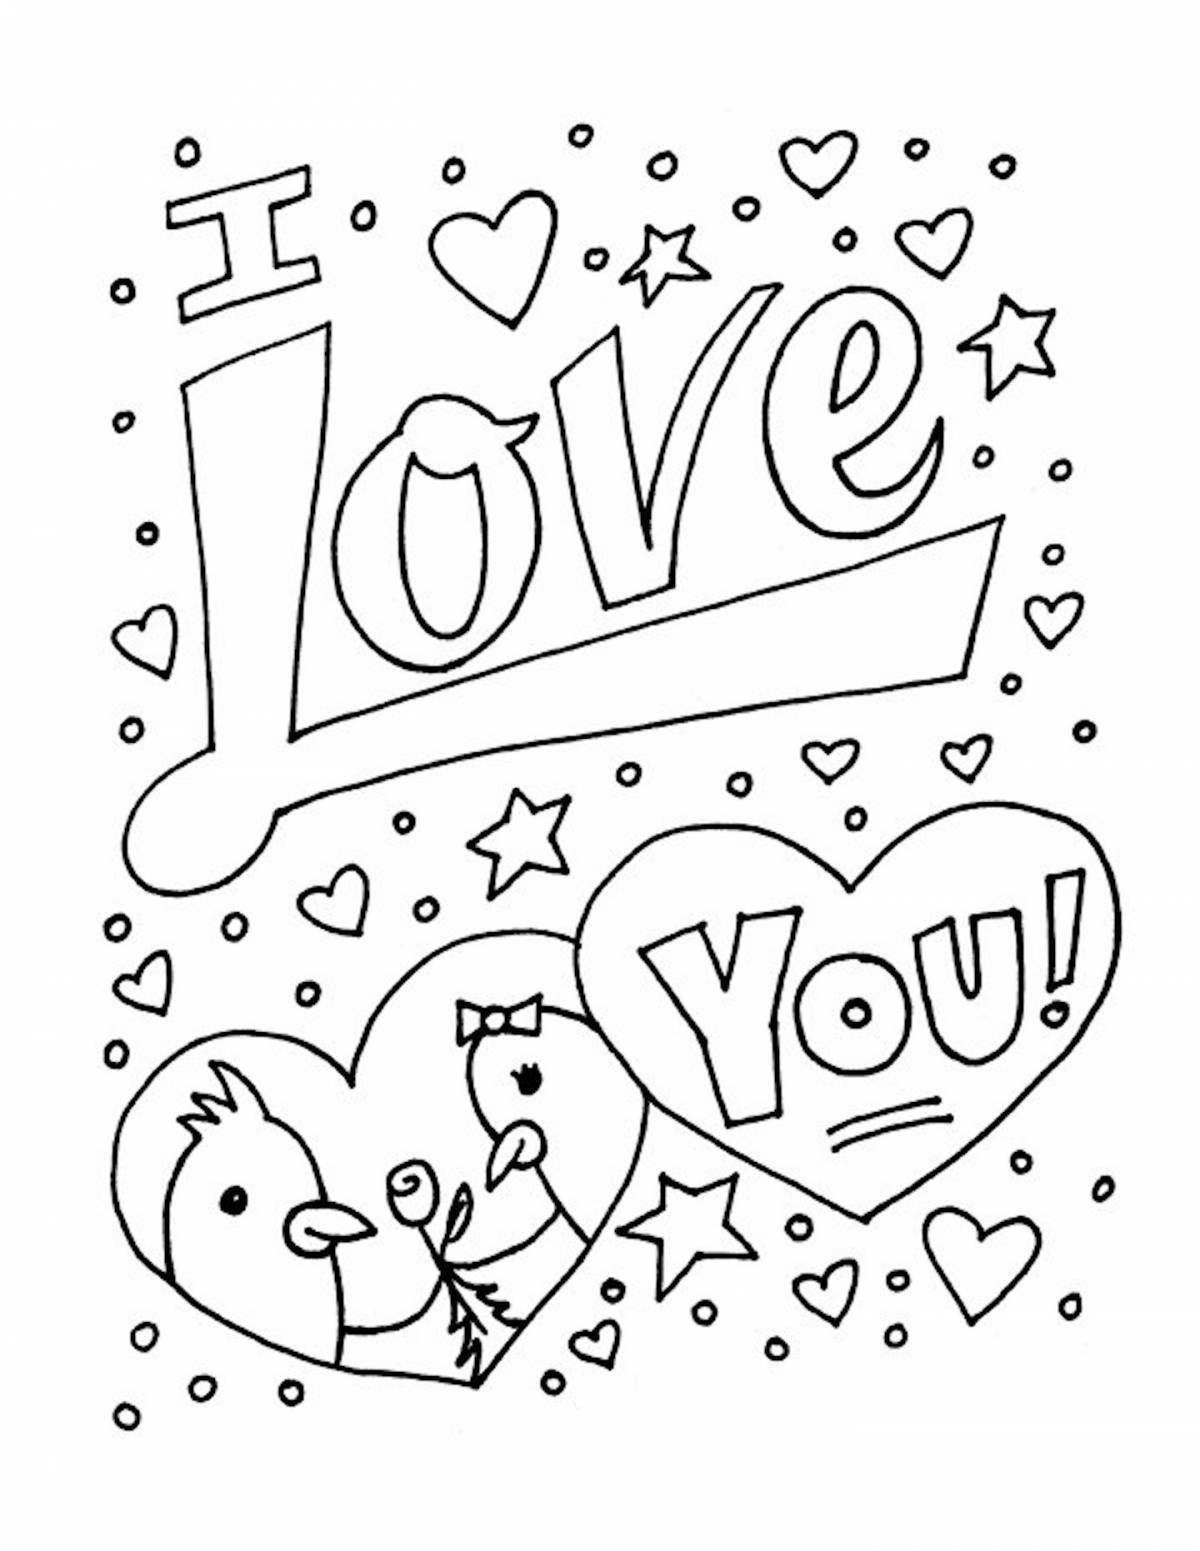 Color-frenzy coloring page for 15 year old girls